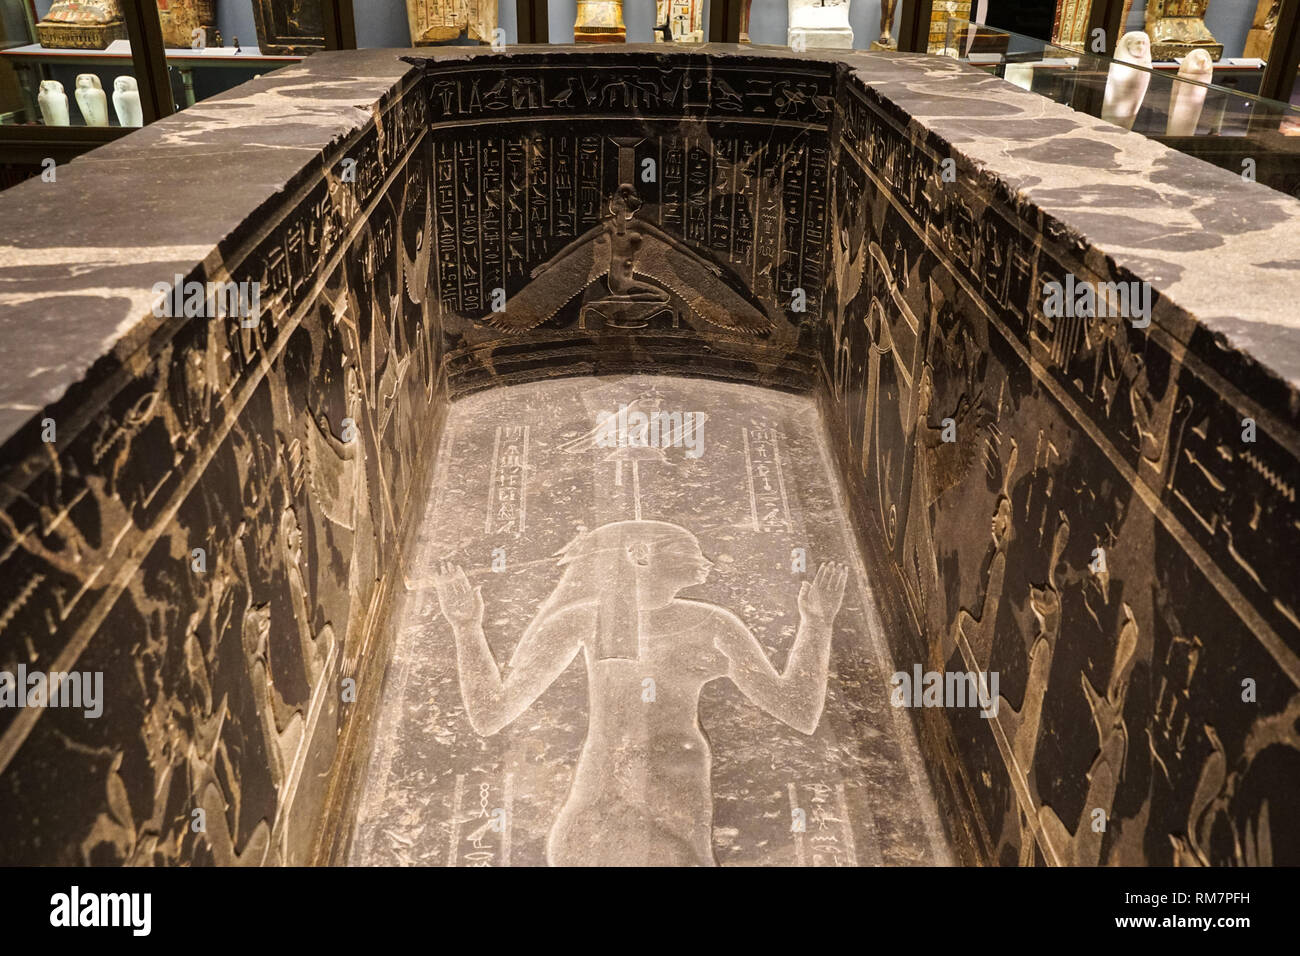 Sarcophagus at Ancient Egypt display in the Kunsthistorisches Museum in Vienna, Austria Stock Photo